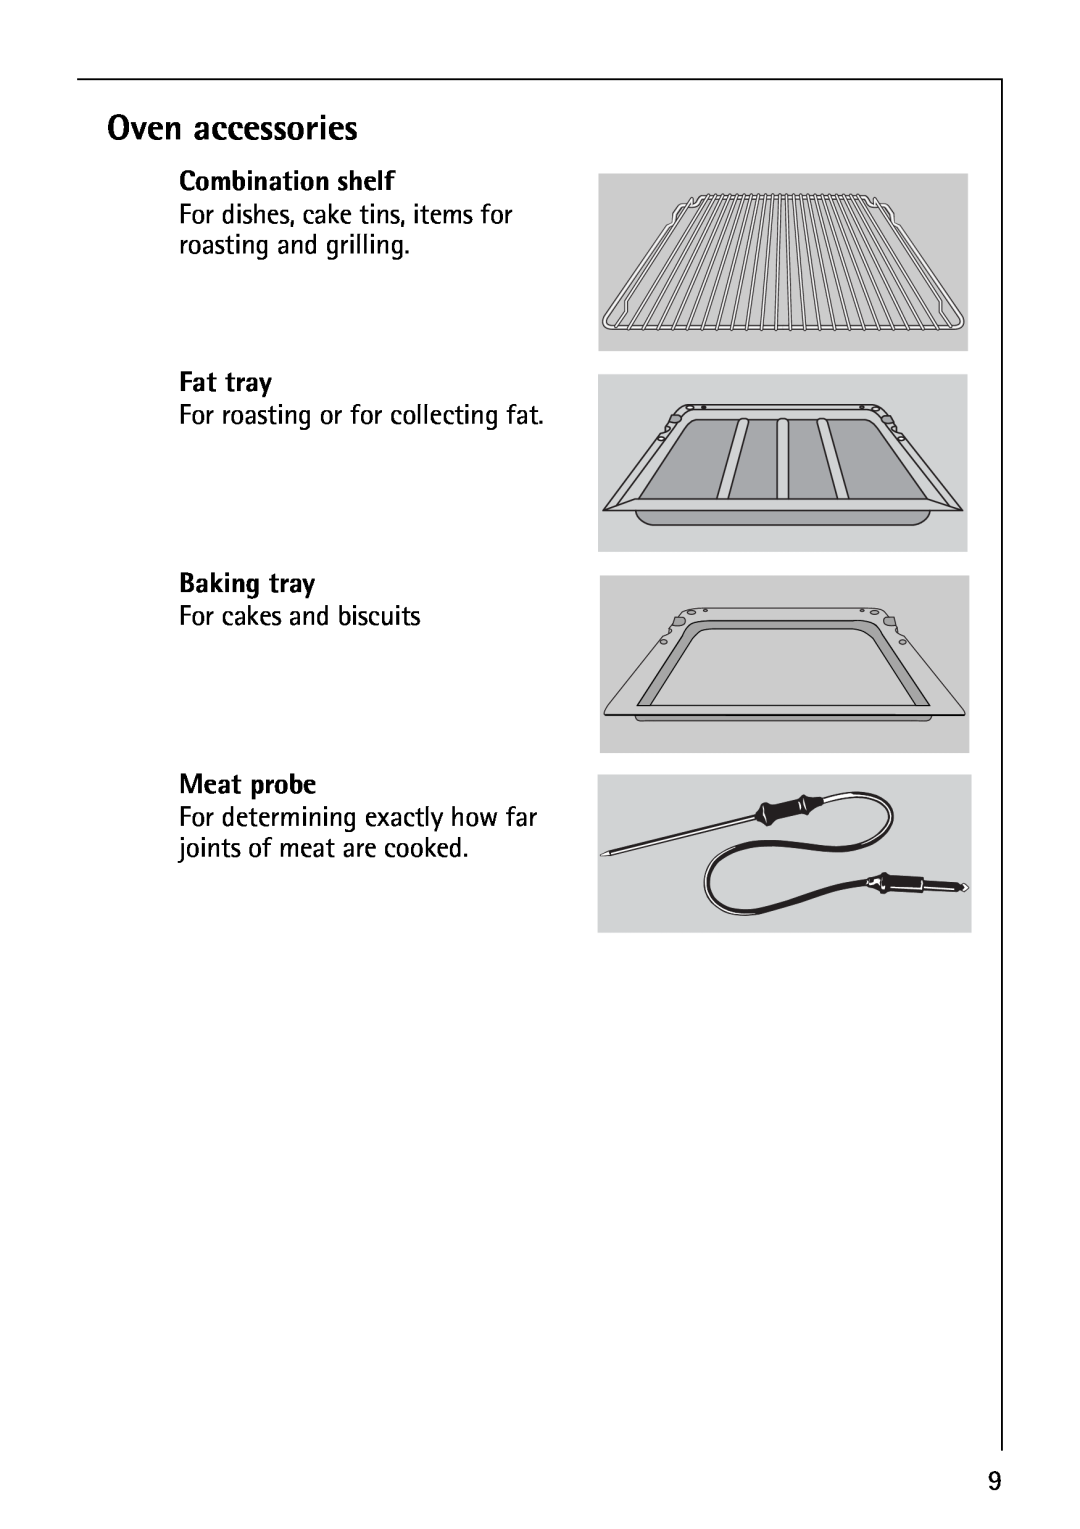 AEG B4130-1 operating instructions Oven accessories, Combination shelf, Fat tray, Baking tray, Meat probe 